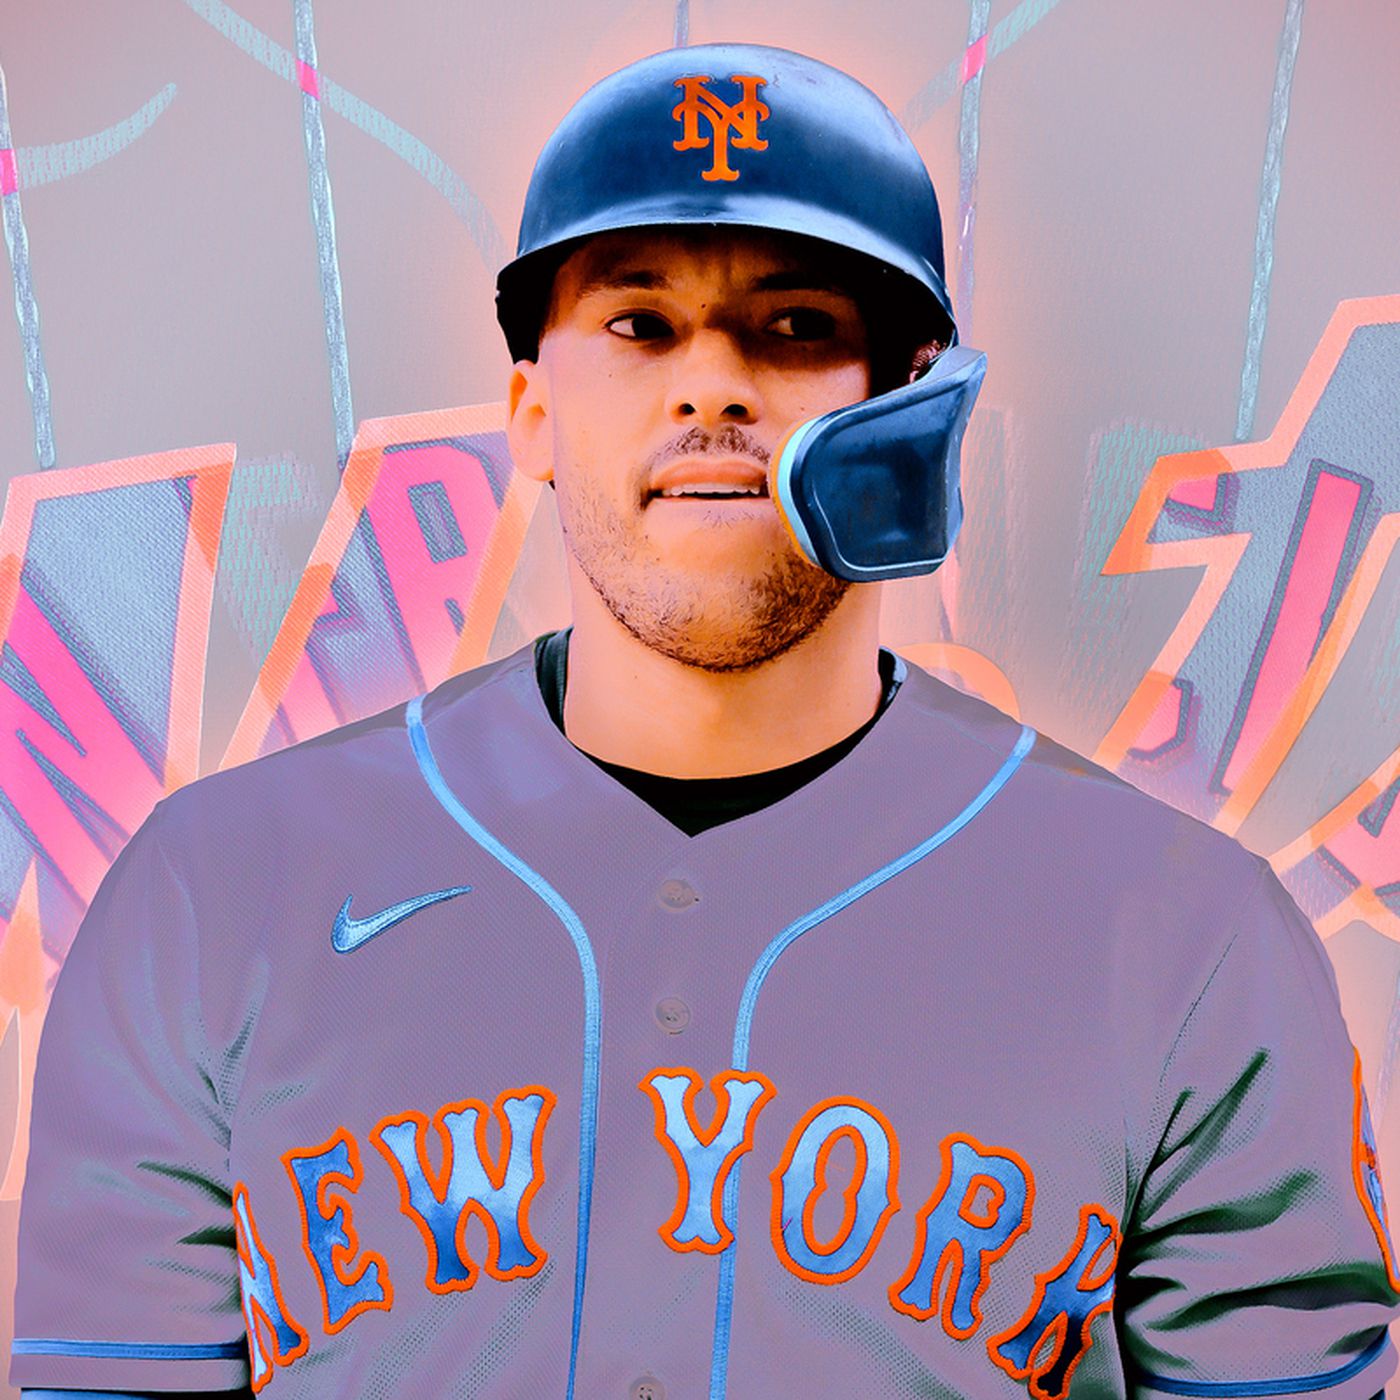 The New York Mets Will Take Carlos Correa, Too - The Ringer